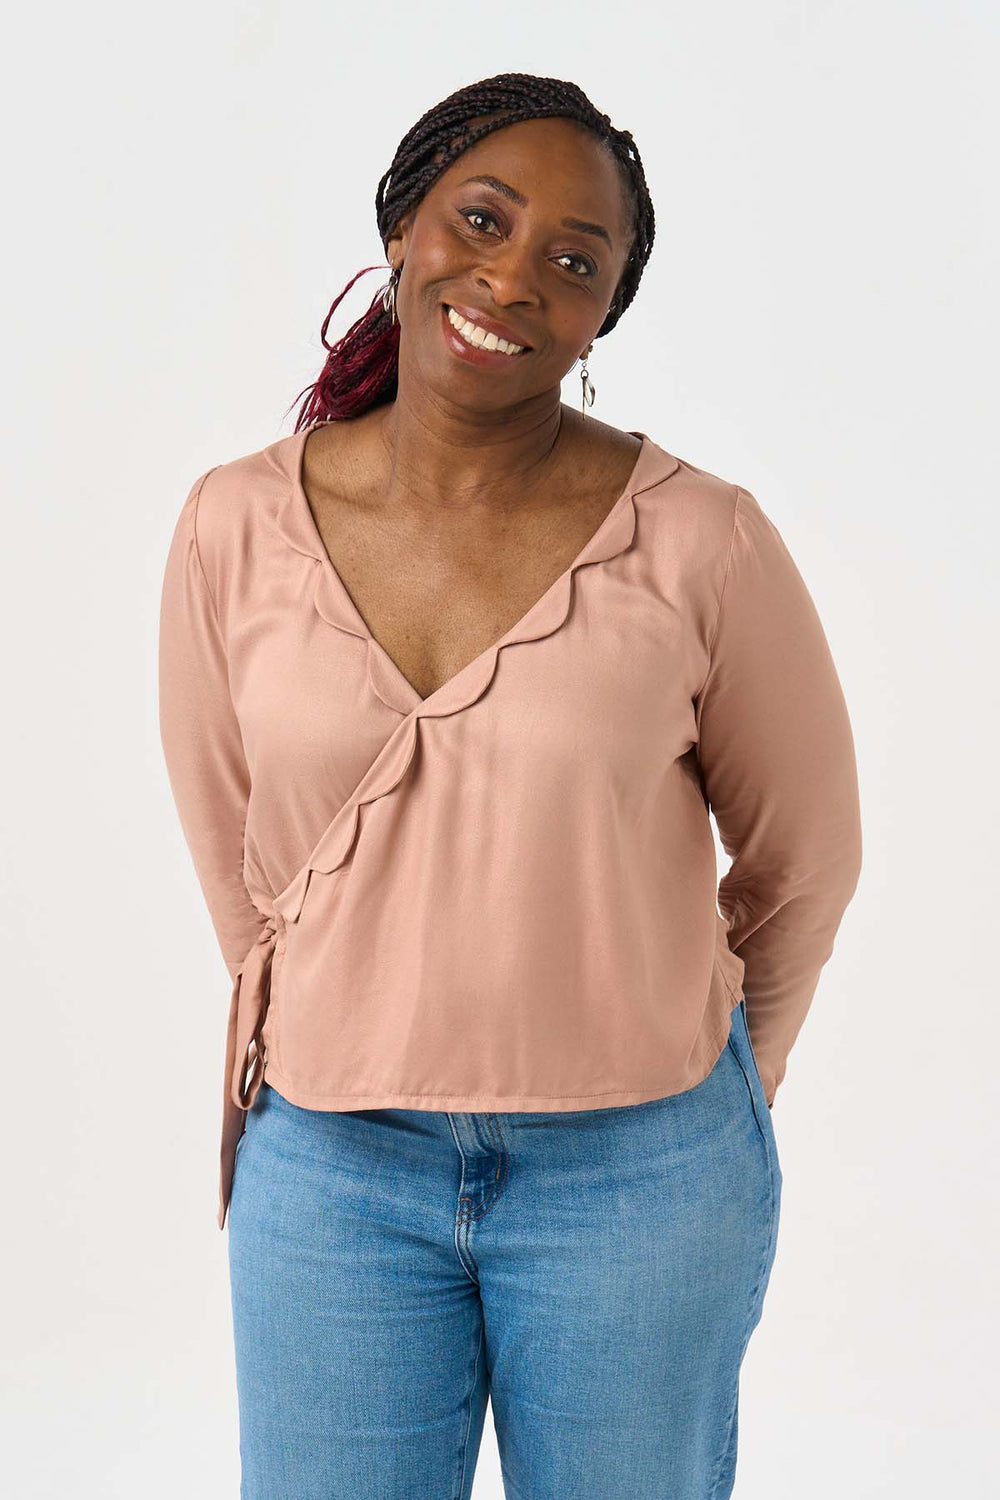 Woman wearing the Josephine Blouse sewing pattern from Sew Over It on The Fold Line. A wrap blouse pattern made in rayon challis, viscose, charmeuse, sandwashed silk and crepe de chine fabrics, featuring a relaxed fit, deep V-neck with scalloped edges, si